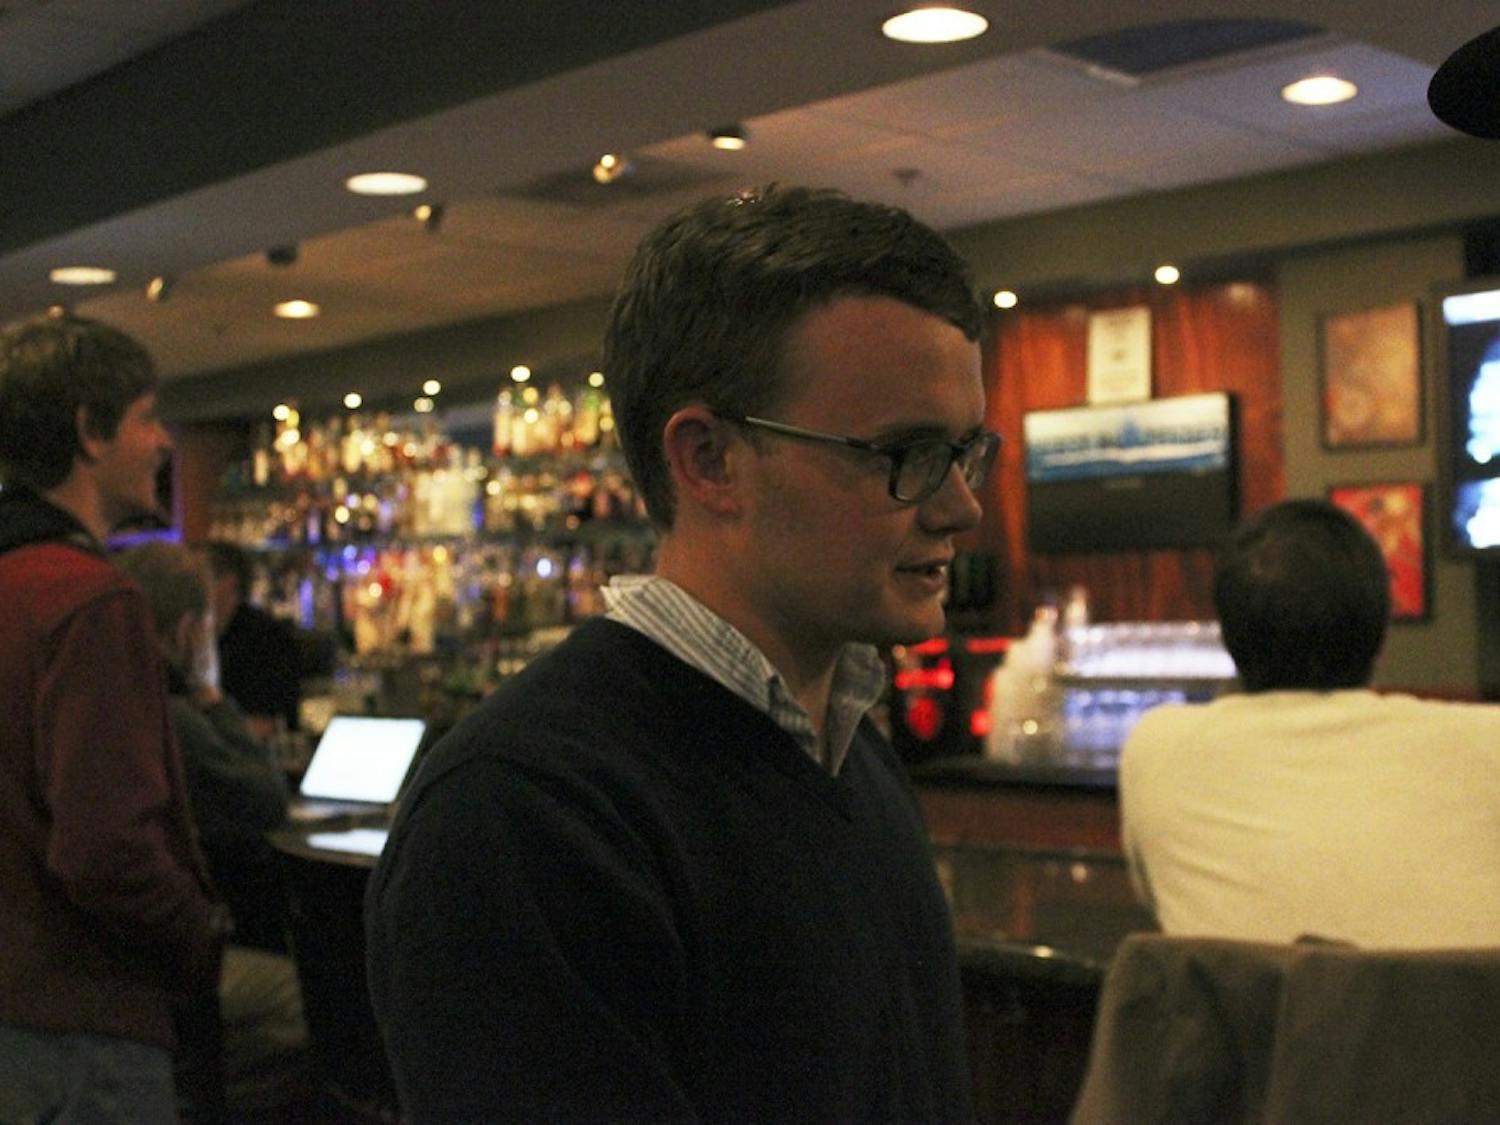 Wilson Parker is attending the Orange County Democrats and Youth Democrats watch party for the 2014 midterm elections at R&R Grill Nov, 4. Wilson parker is the President of the Young Democrats at Chapel Hill. 